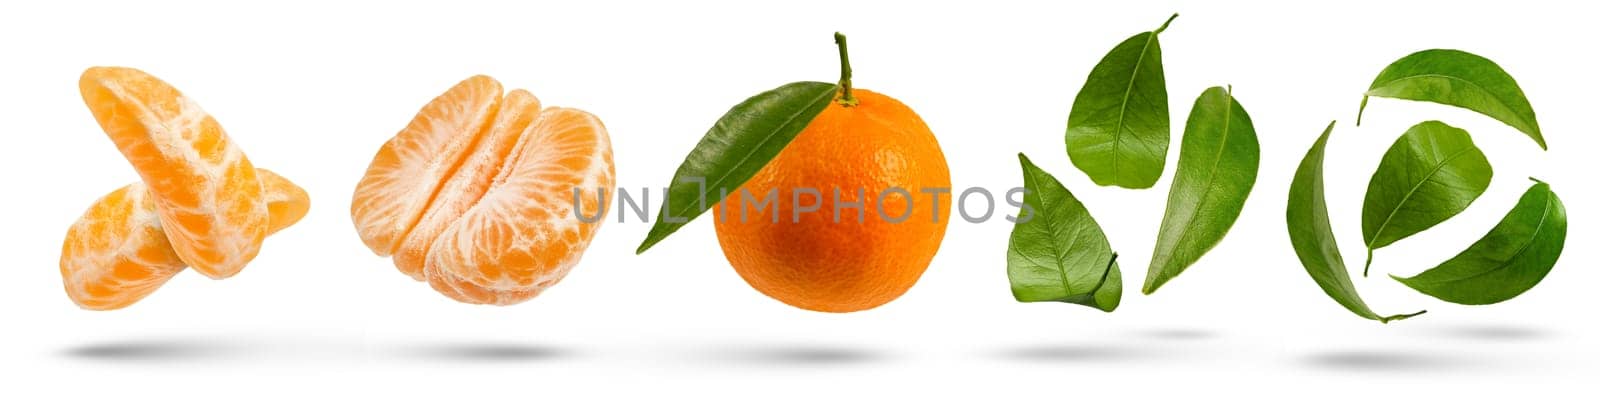 Set of ripe tangerines and their leaves of different cutting methods on a white isolated background. Tangerines cut in different ways hang or fall close-up. by SERSOL